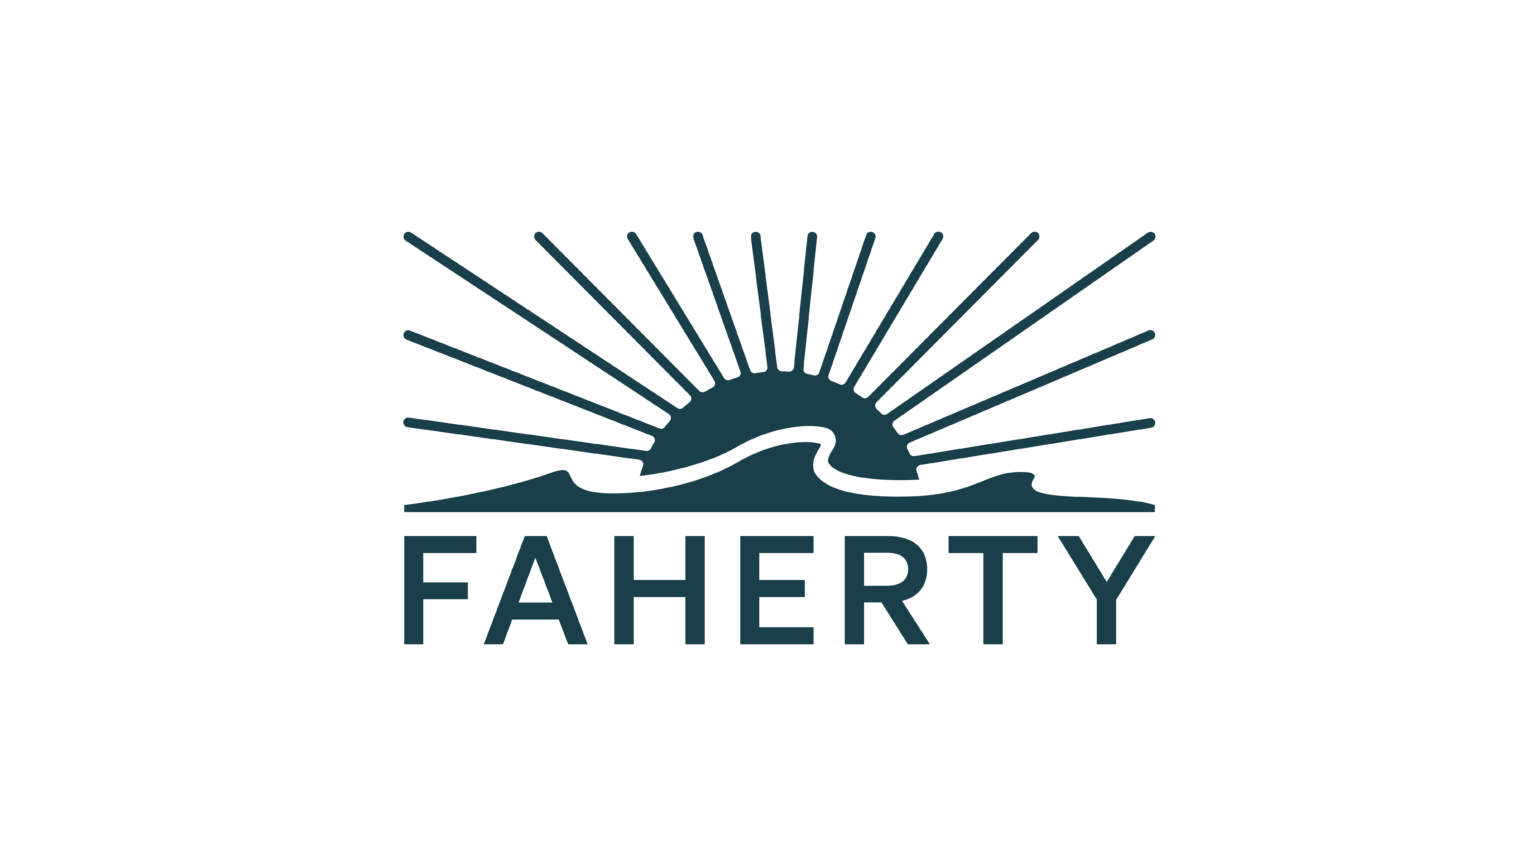 Faherty - Coming Soon! - Derby Street Shops